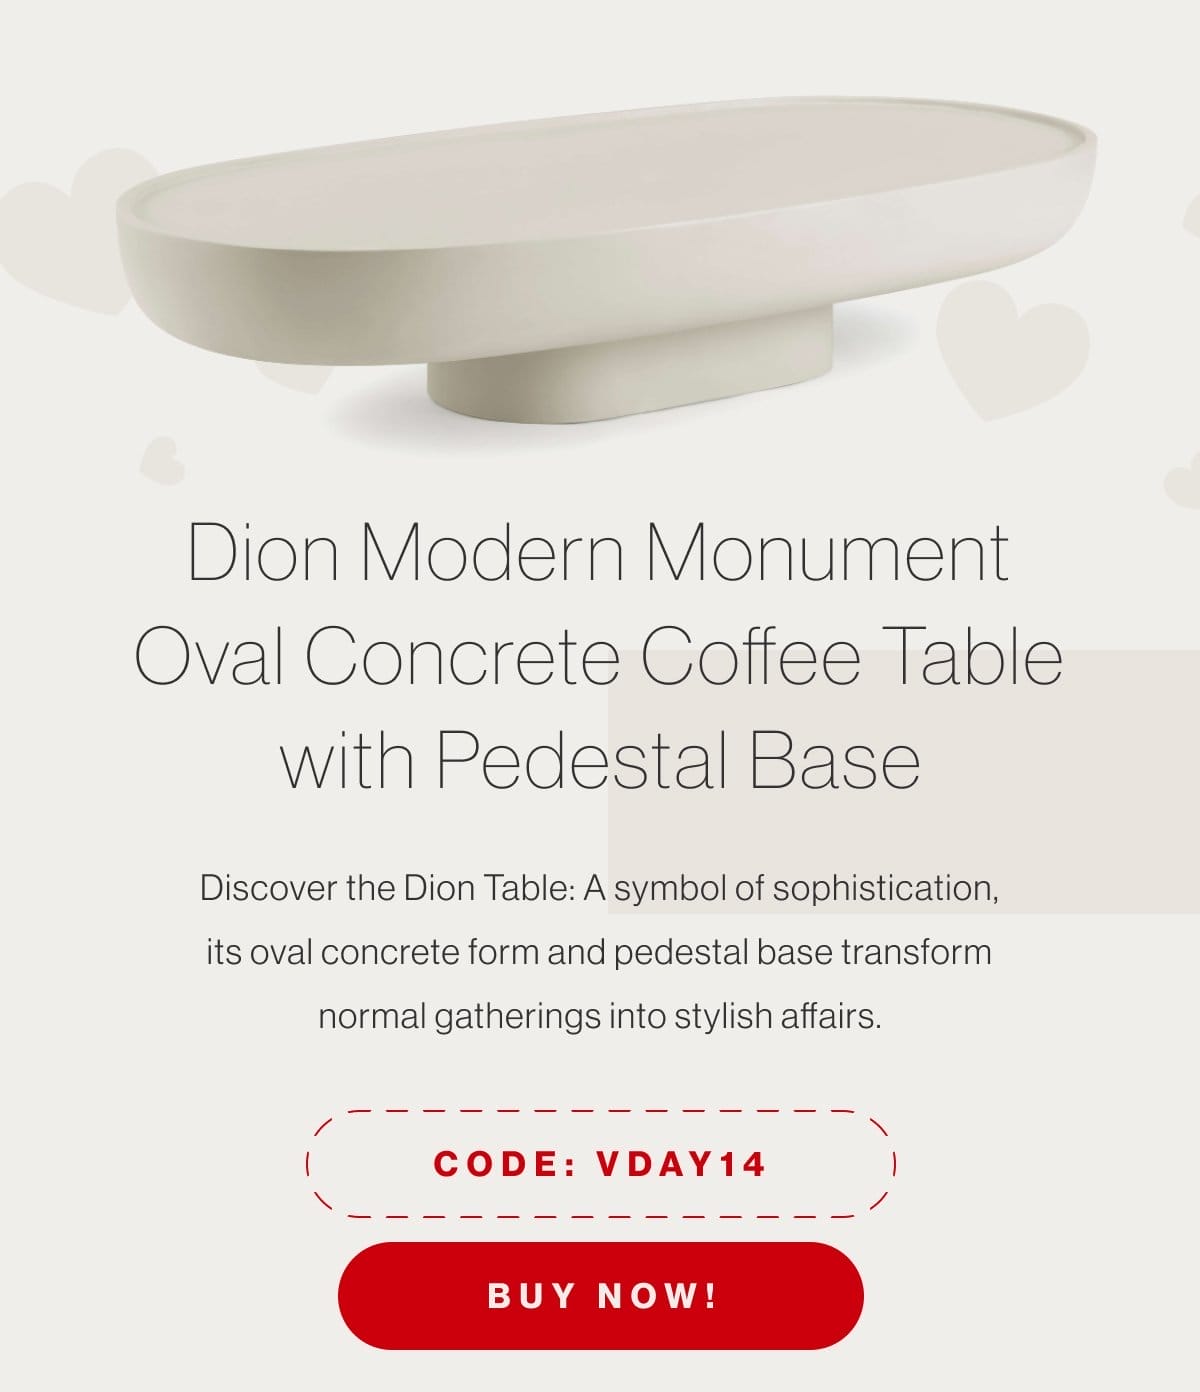 Dion Modern Monument Oval Concrete Coffee Table with Pedestal Base - Discover the Dion Table: A symbol of sophistication, its oval concrete form and pedestal base transform normal gatherings into stylish affairs. - Code: VDAY14 - Buy Now!